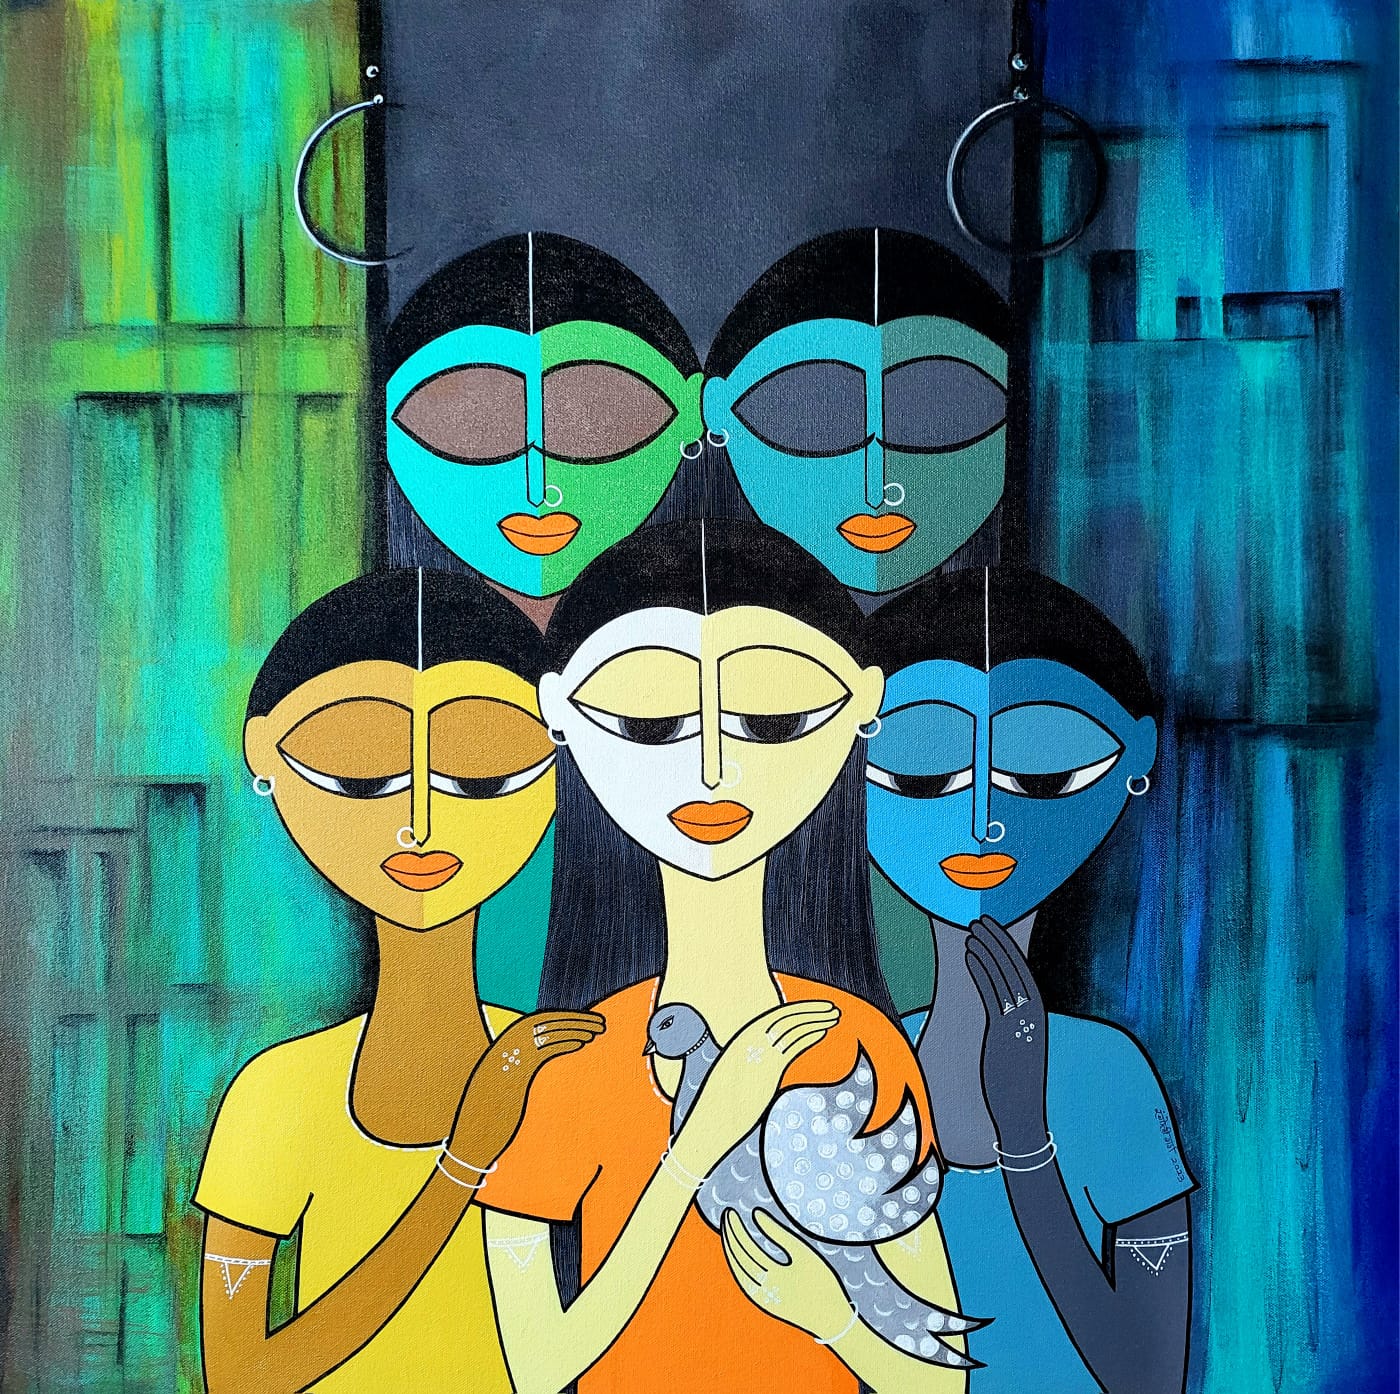 Figurative Painting with Mixed Media on Canvas "Behold" art by Rangoli Garg